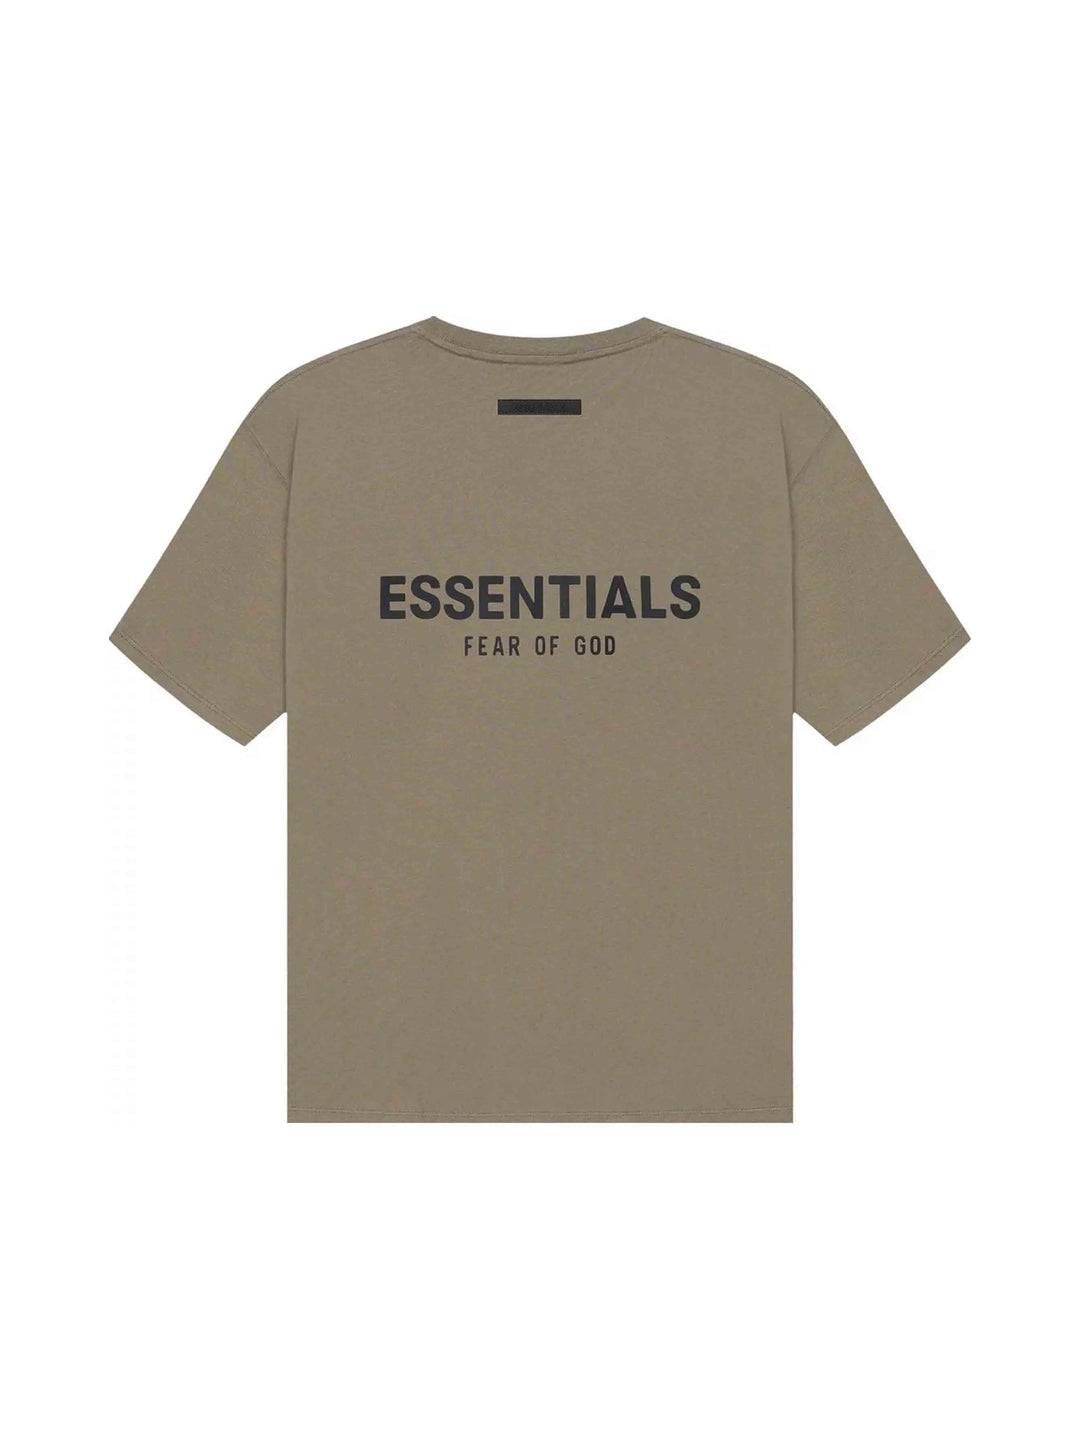 Fear of God Essentials T-shirt Taupe - Prior